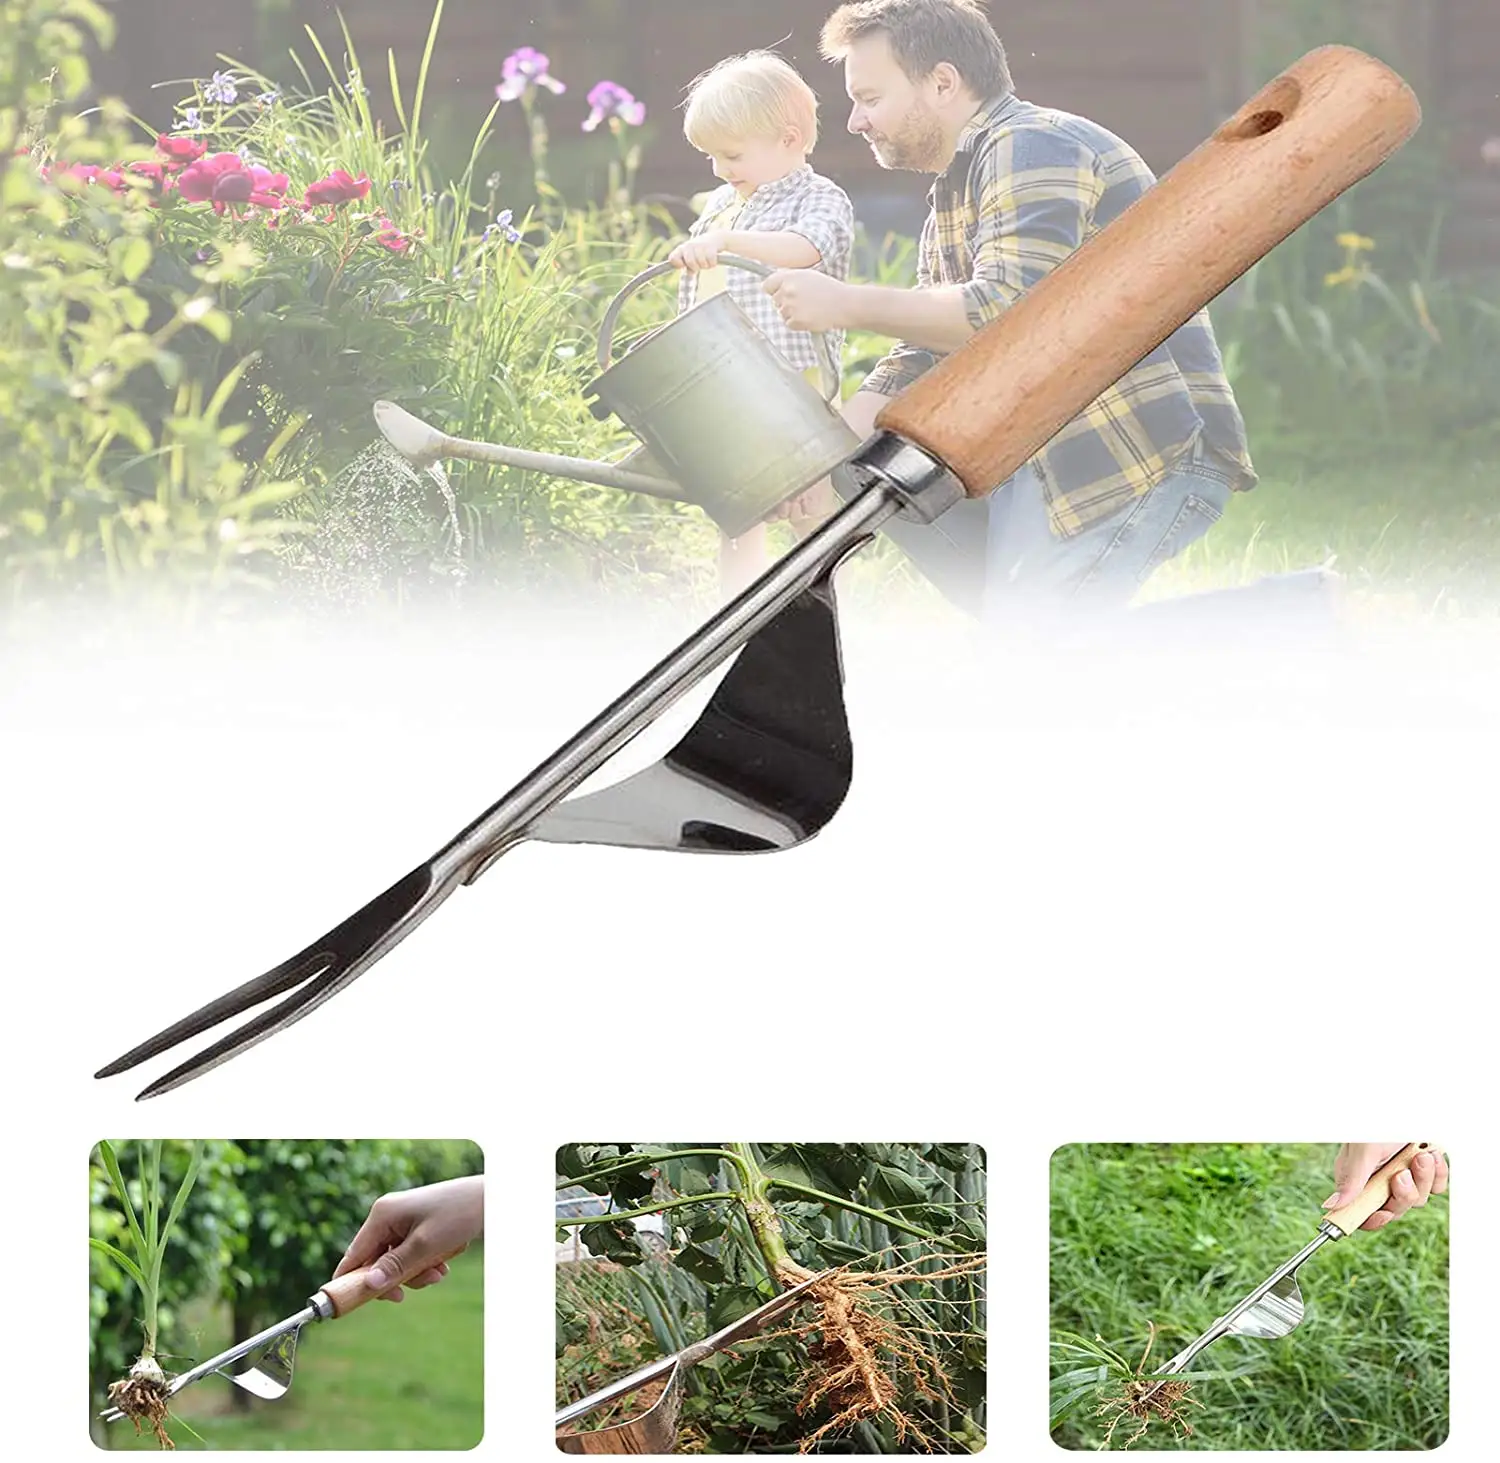 Garden Weeder Tool Lawn Sturdy Digging Puller Hand Weeding Effective Easy Apply Trimming Removal Grass puller Long Handle